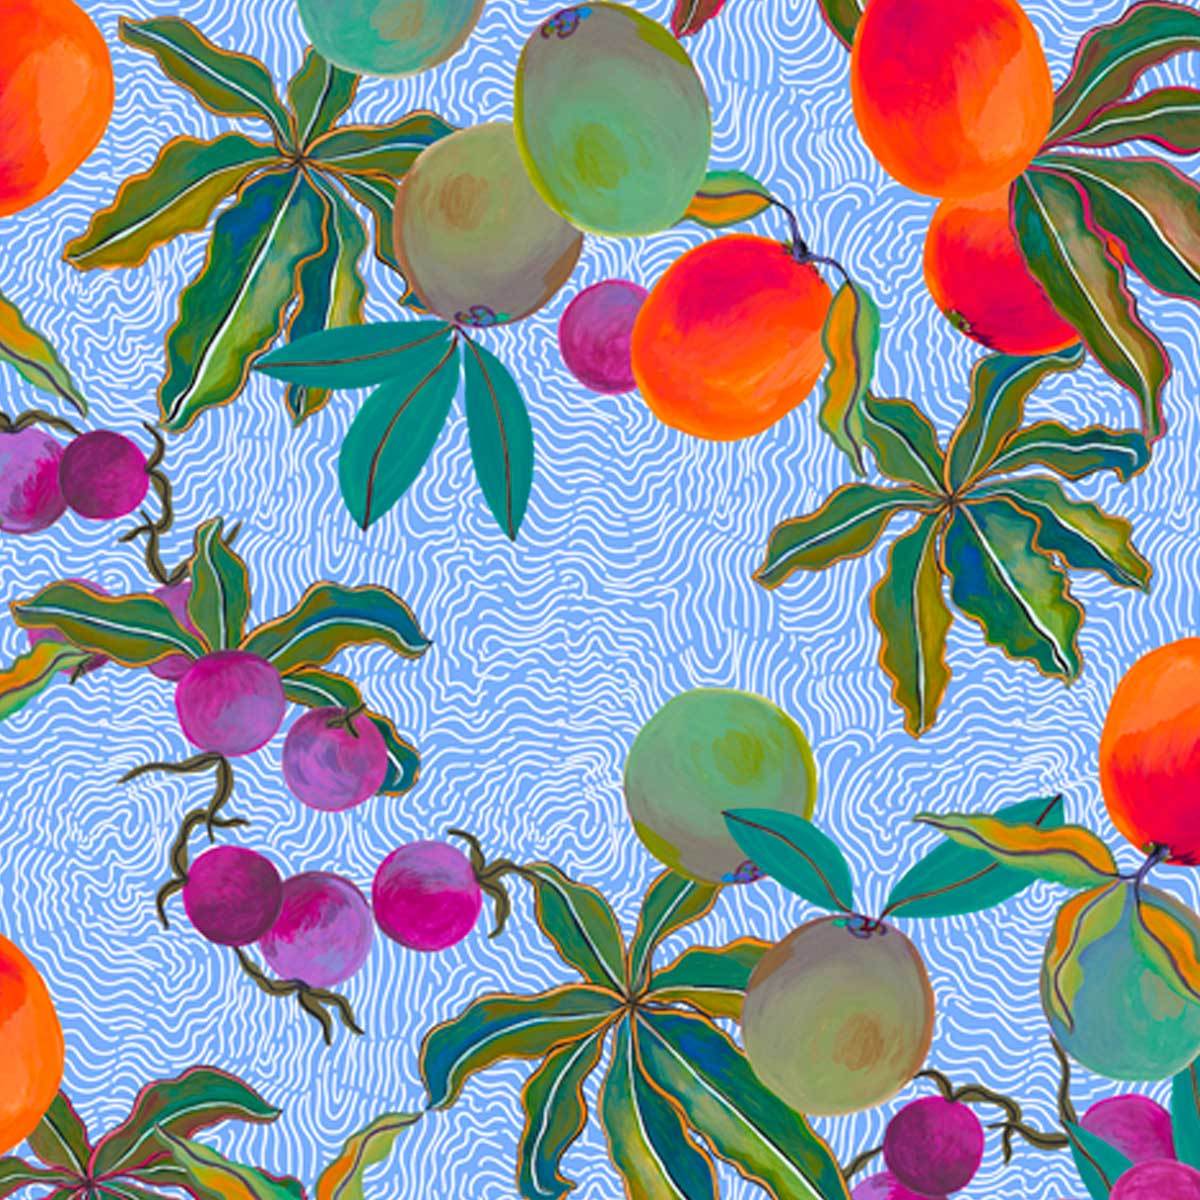 Exotic Fruits Wavy Lines Pattern by MARYLENE MADOU